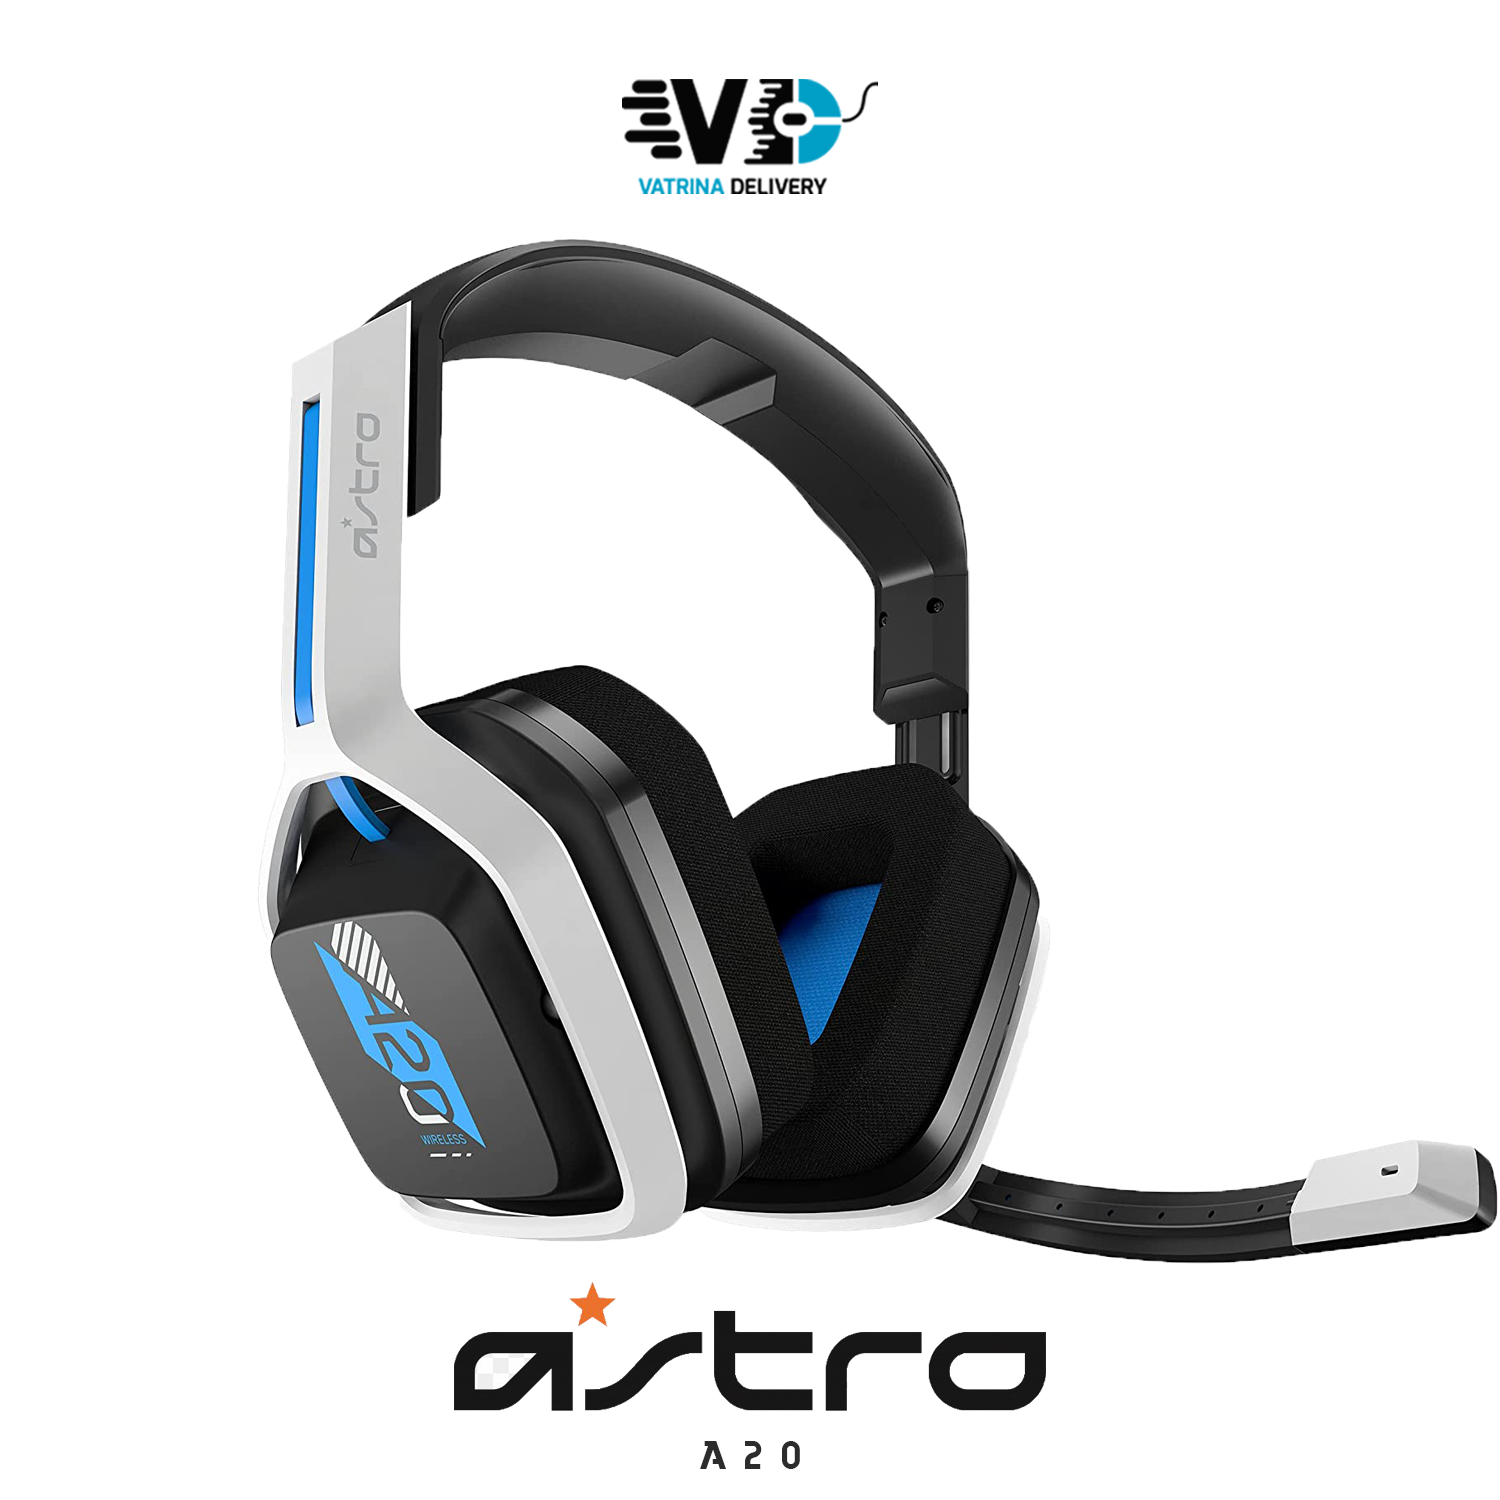 ASTRO Gaming A20 Wireless Headset Gen 2, Lightweight Flip-To-Mute Microphone 15 Hour Battery Life, 15 m Range, for PS 5, PS4, PC, Mac Photo